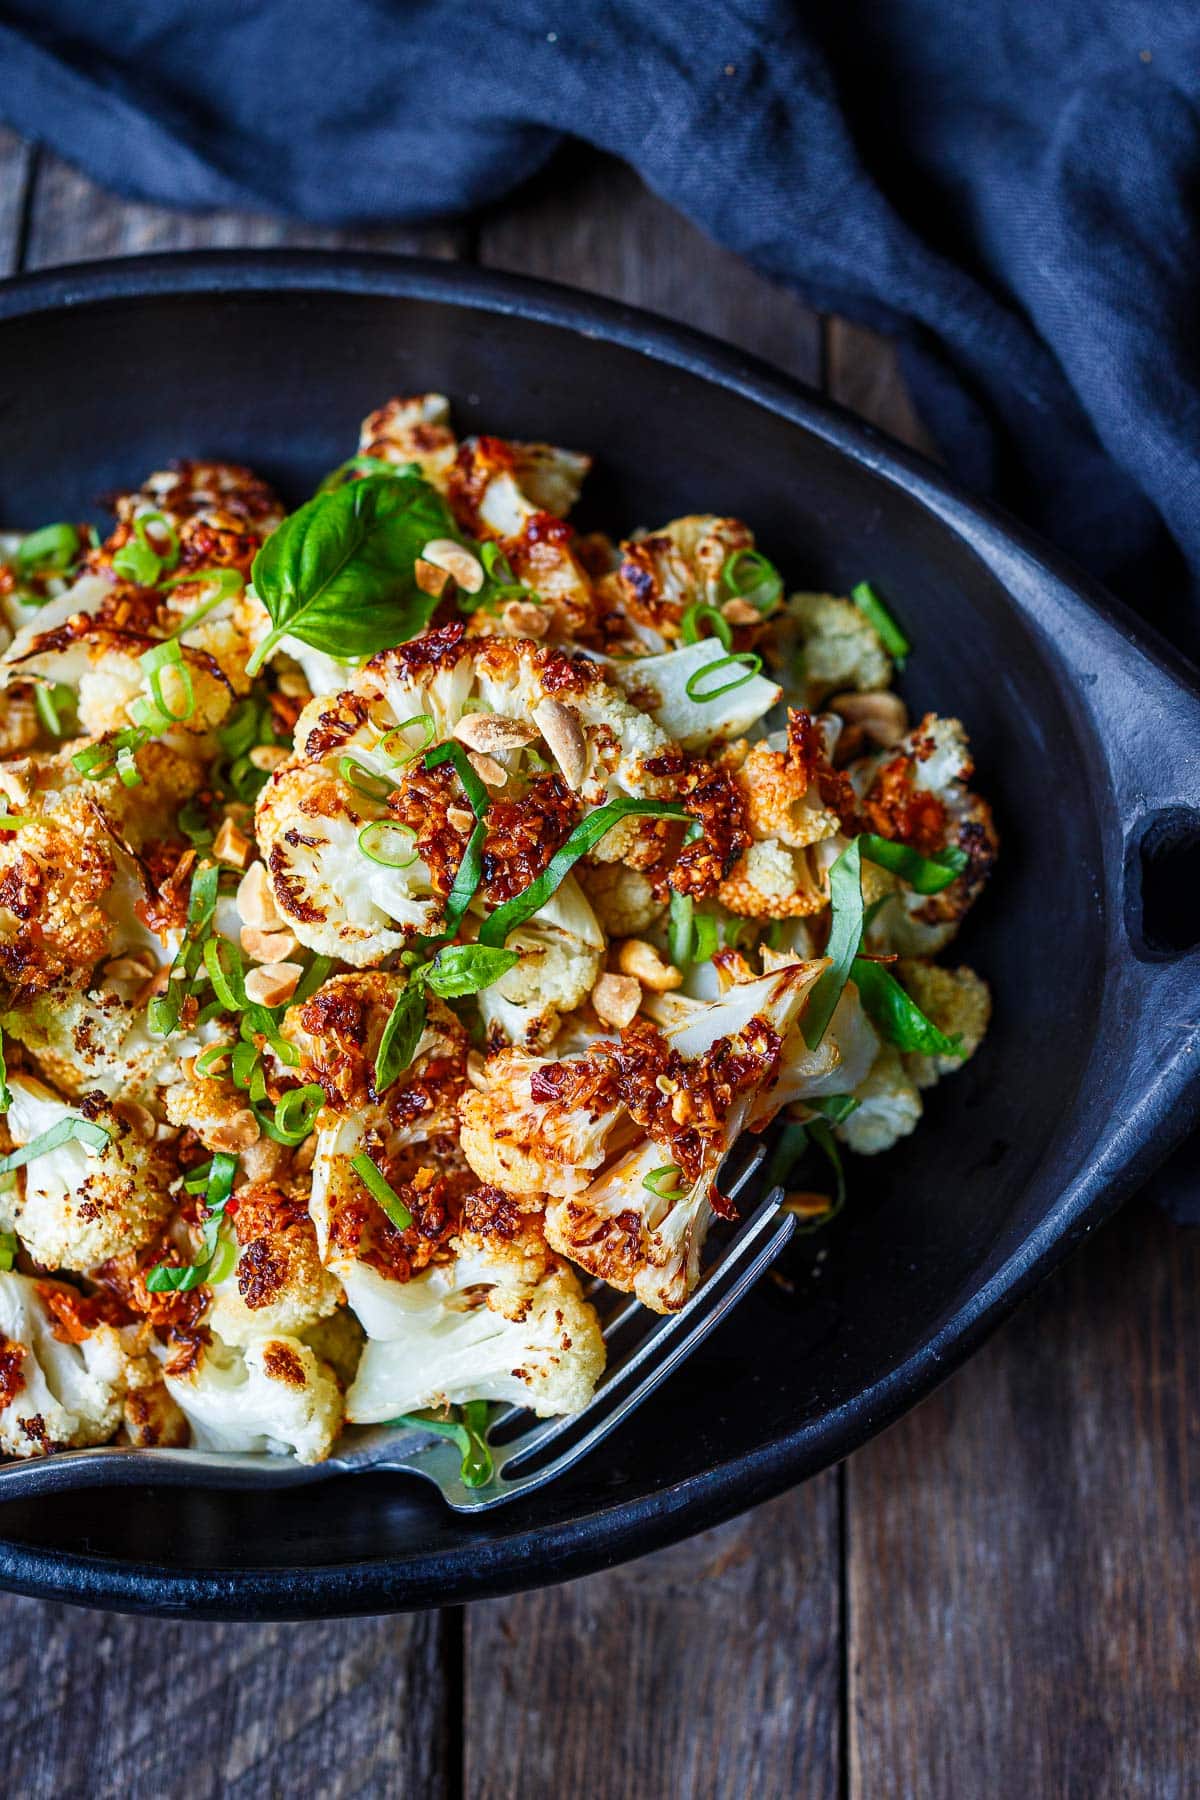 chili crisp cauliflower in serving bowl made with homemade chili crisp, garnished with basil, scallions, and peanuts.